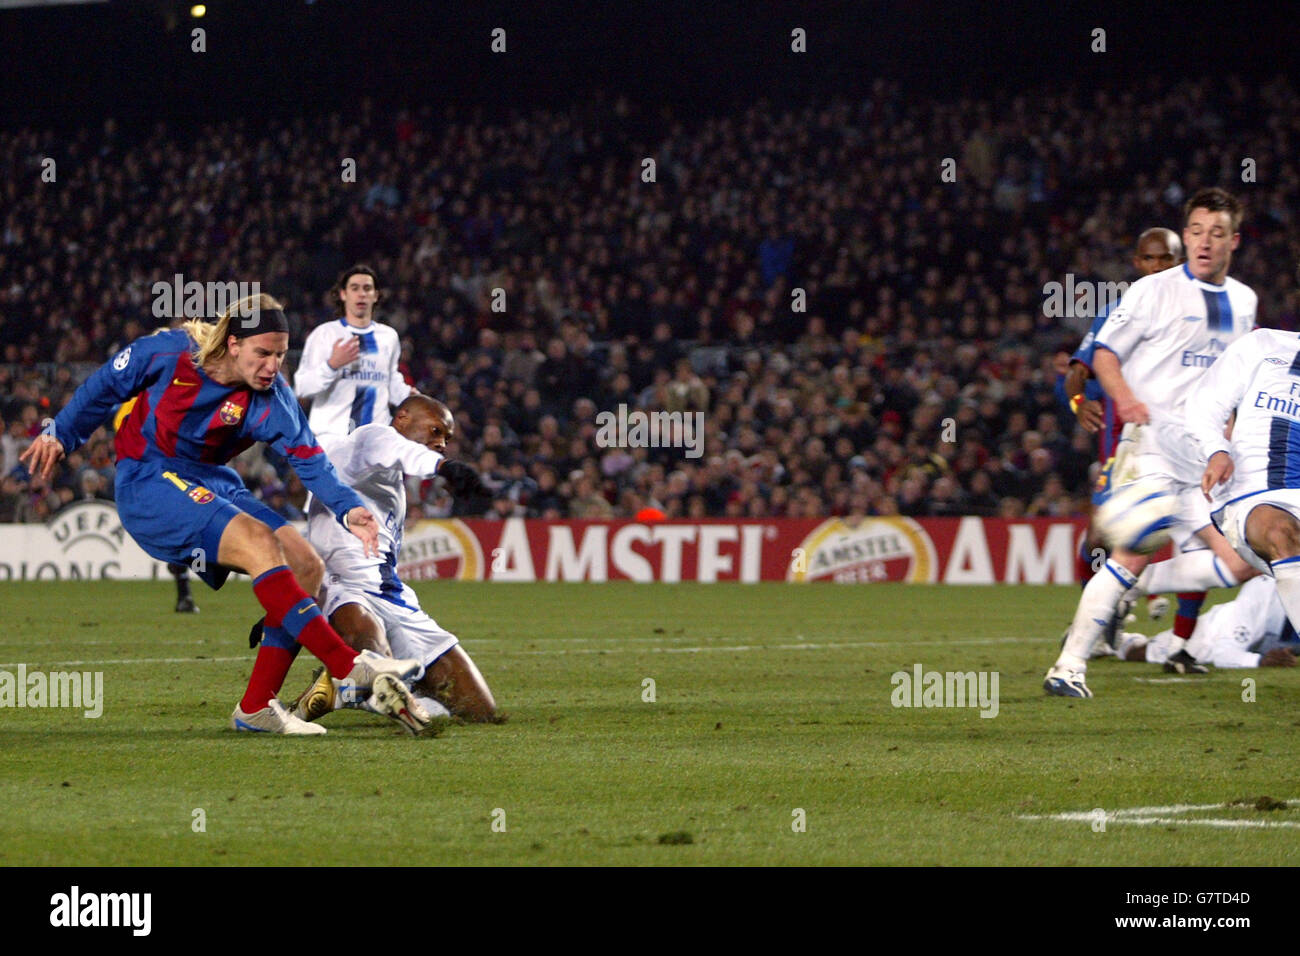 Soccer - UEFA Champions League - Round of 16 - First Leg - Barcelona v Chelsea - Nou Camp. Barcelona's Maxi Lopez scores the equalizing goal Stock Photo